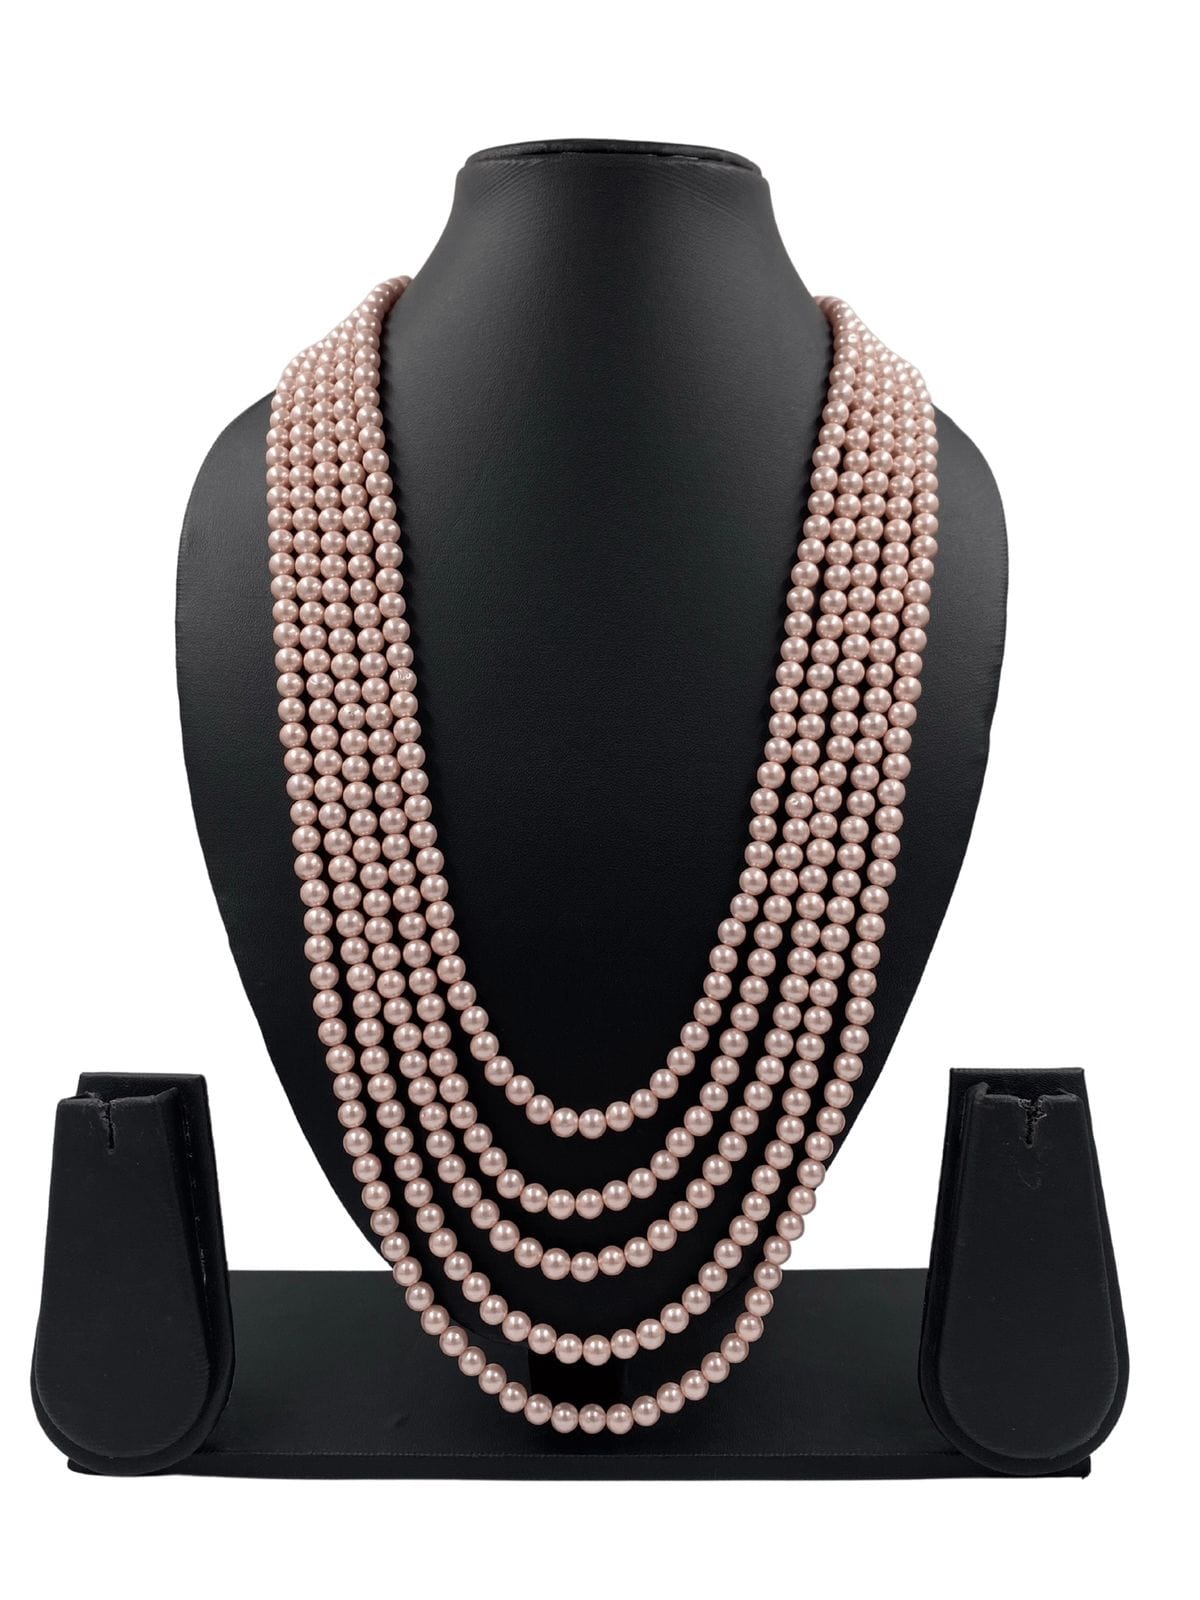 Multilayered Rose Pink Shell Pearls Sherwani Mala Necklace For Grooms By Gehna Shop Beads Jewellery